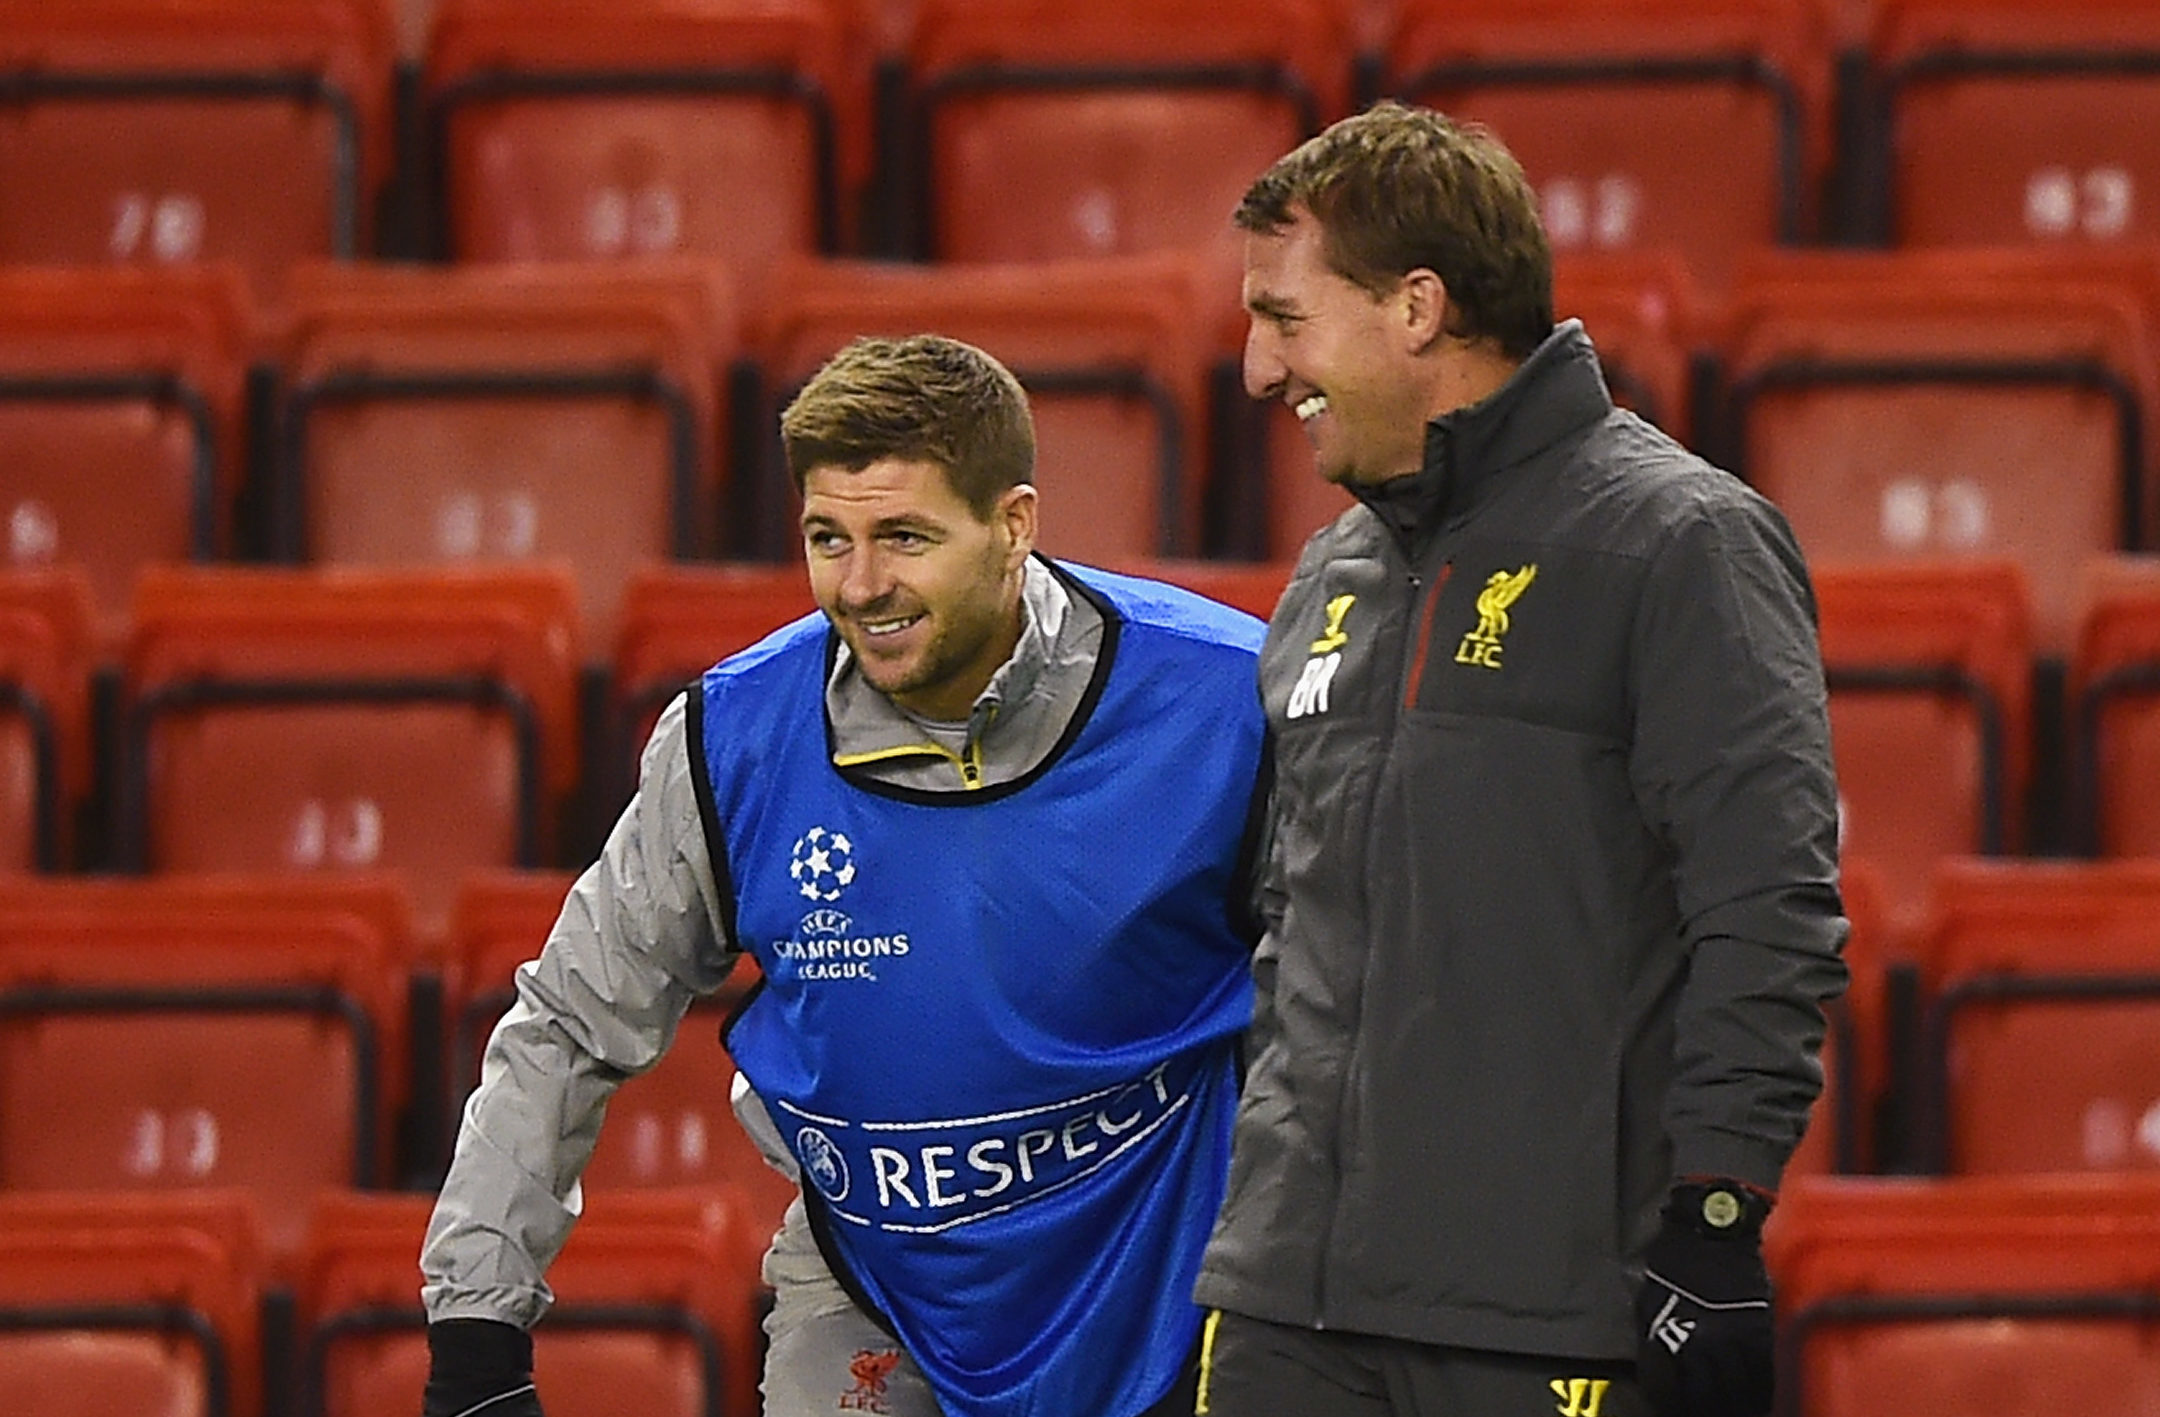 Brendan Rodgers and Steven Gerrard during a training session at Liverpool (Laurence Griffiths/Getty Images)